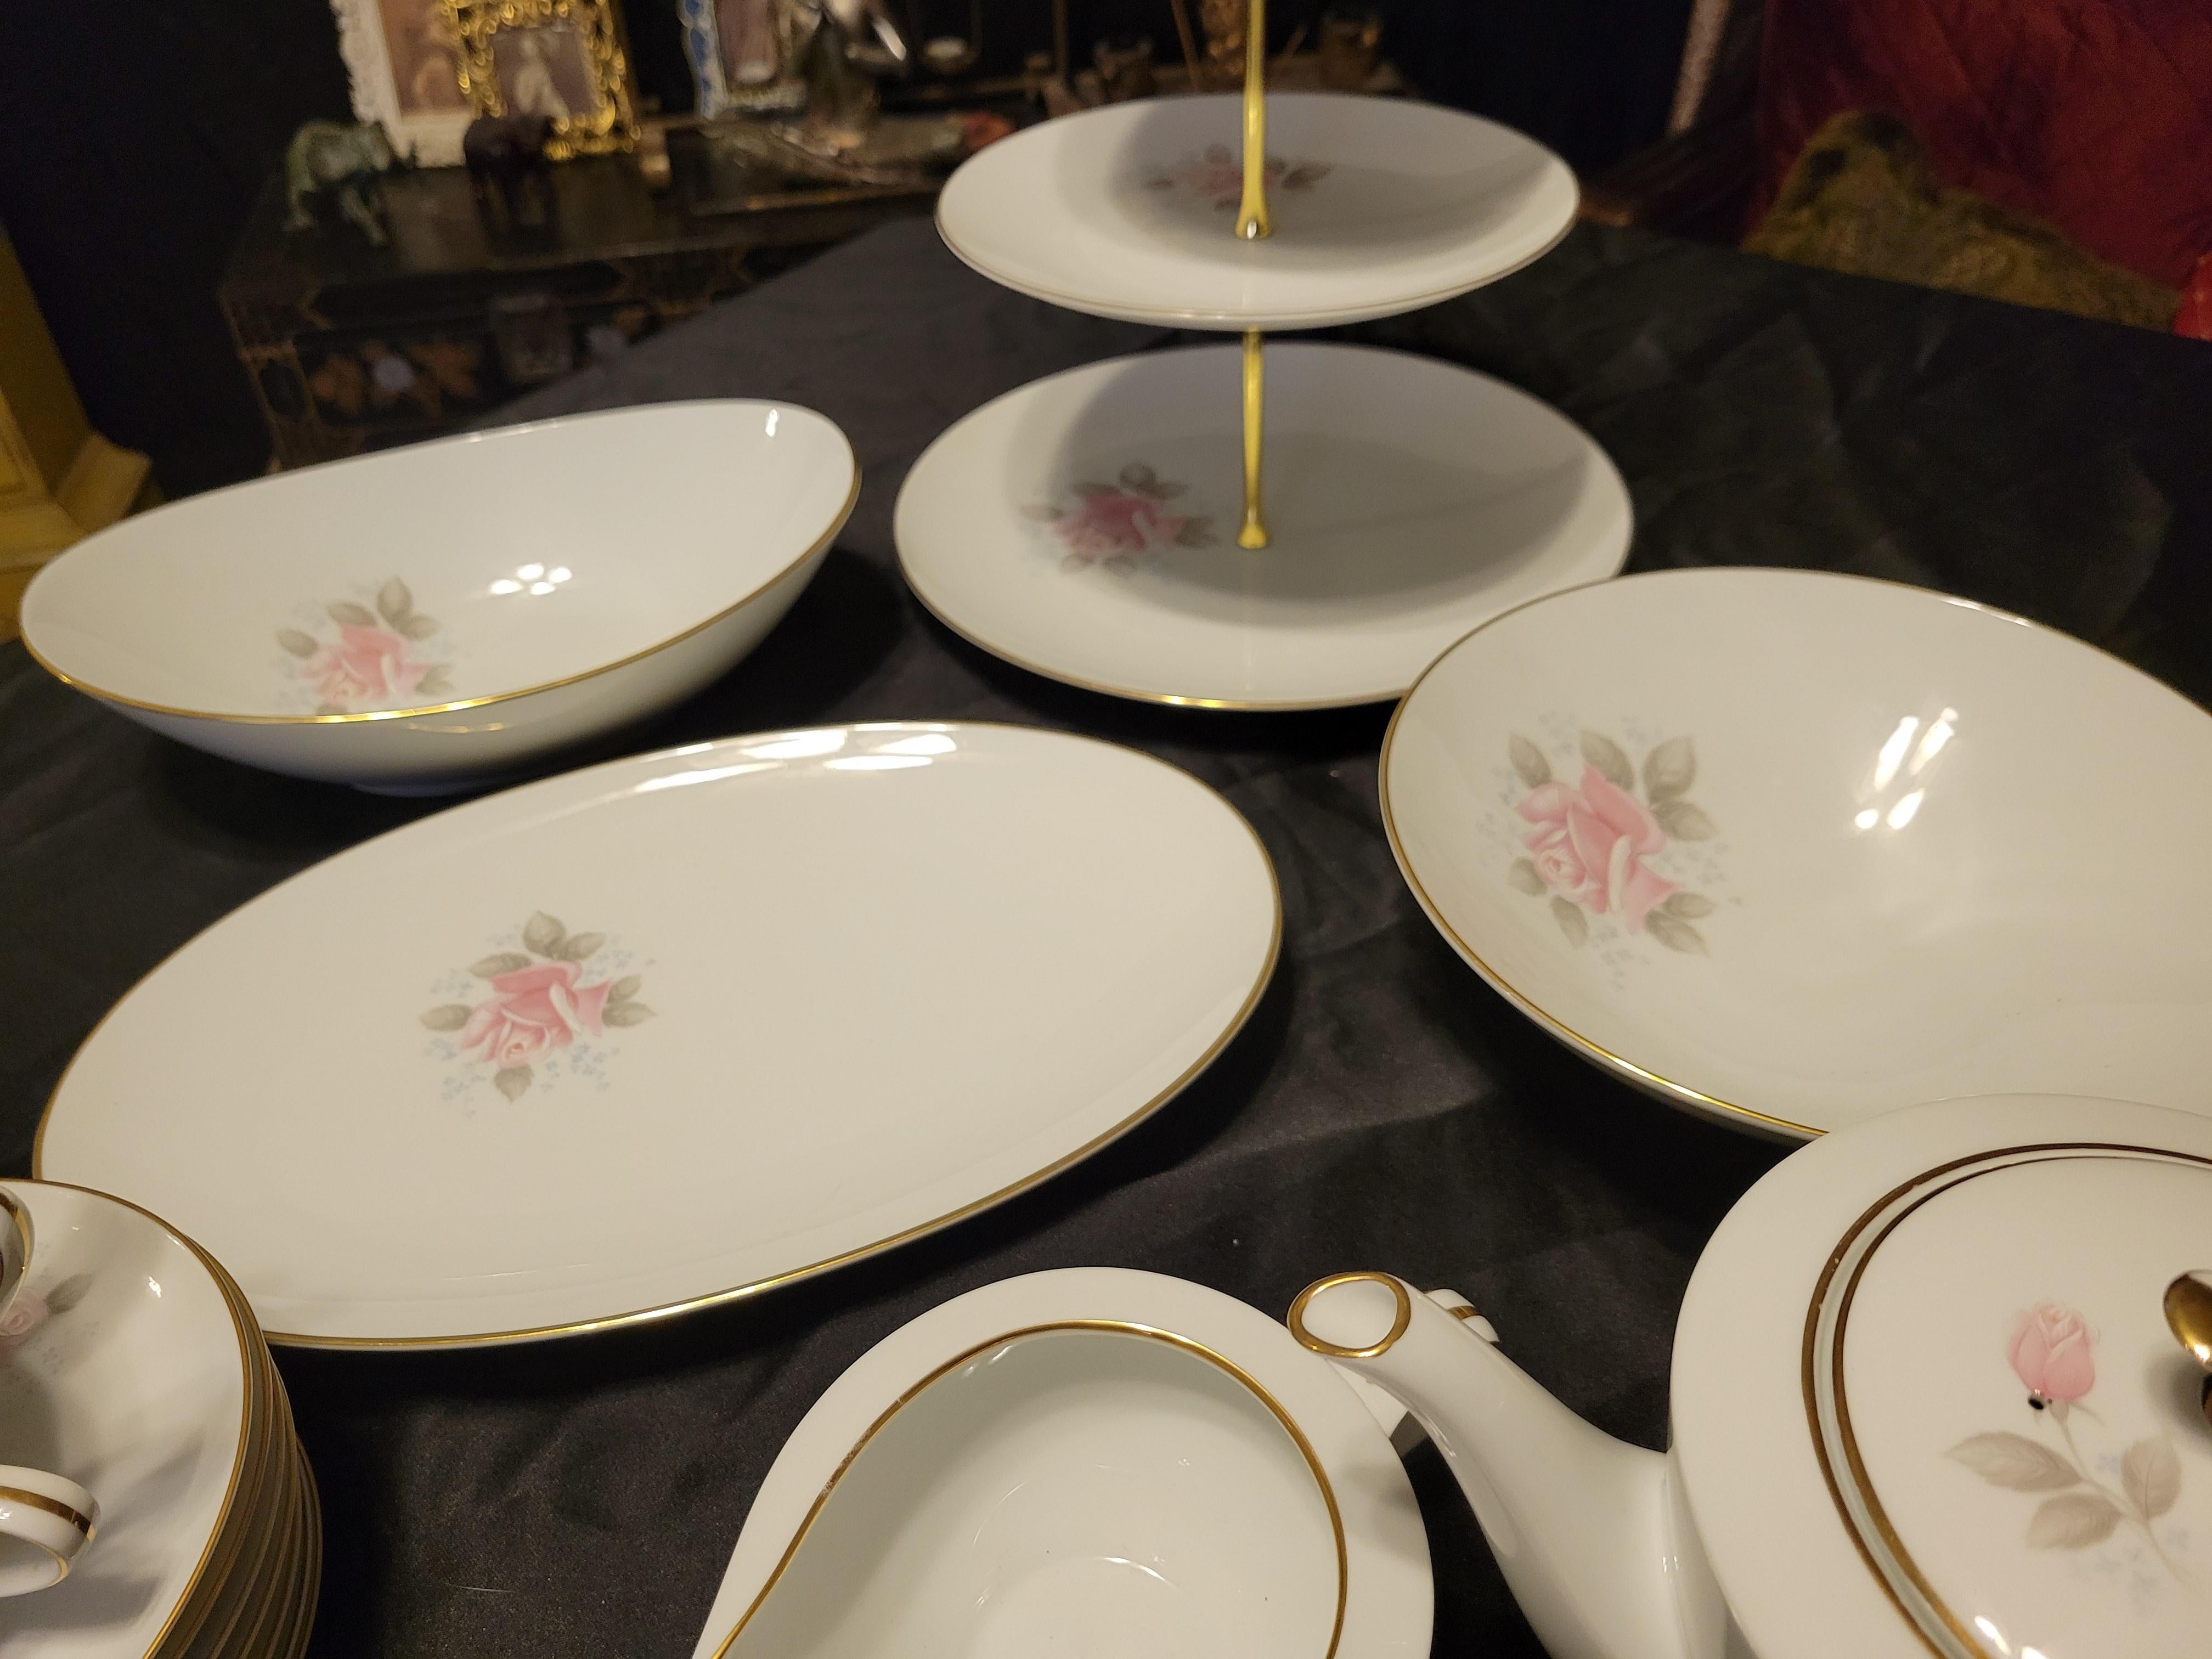 Vintage Noritake 'Roseville' Fine China Dining Set for 8 Persons - 79 Items For Sale 10